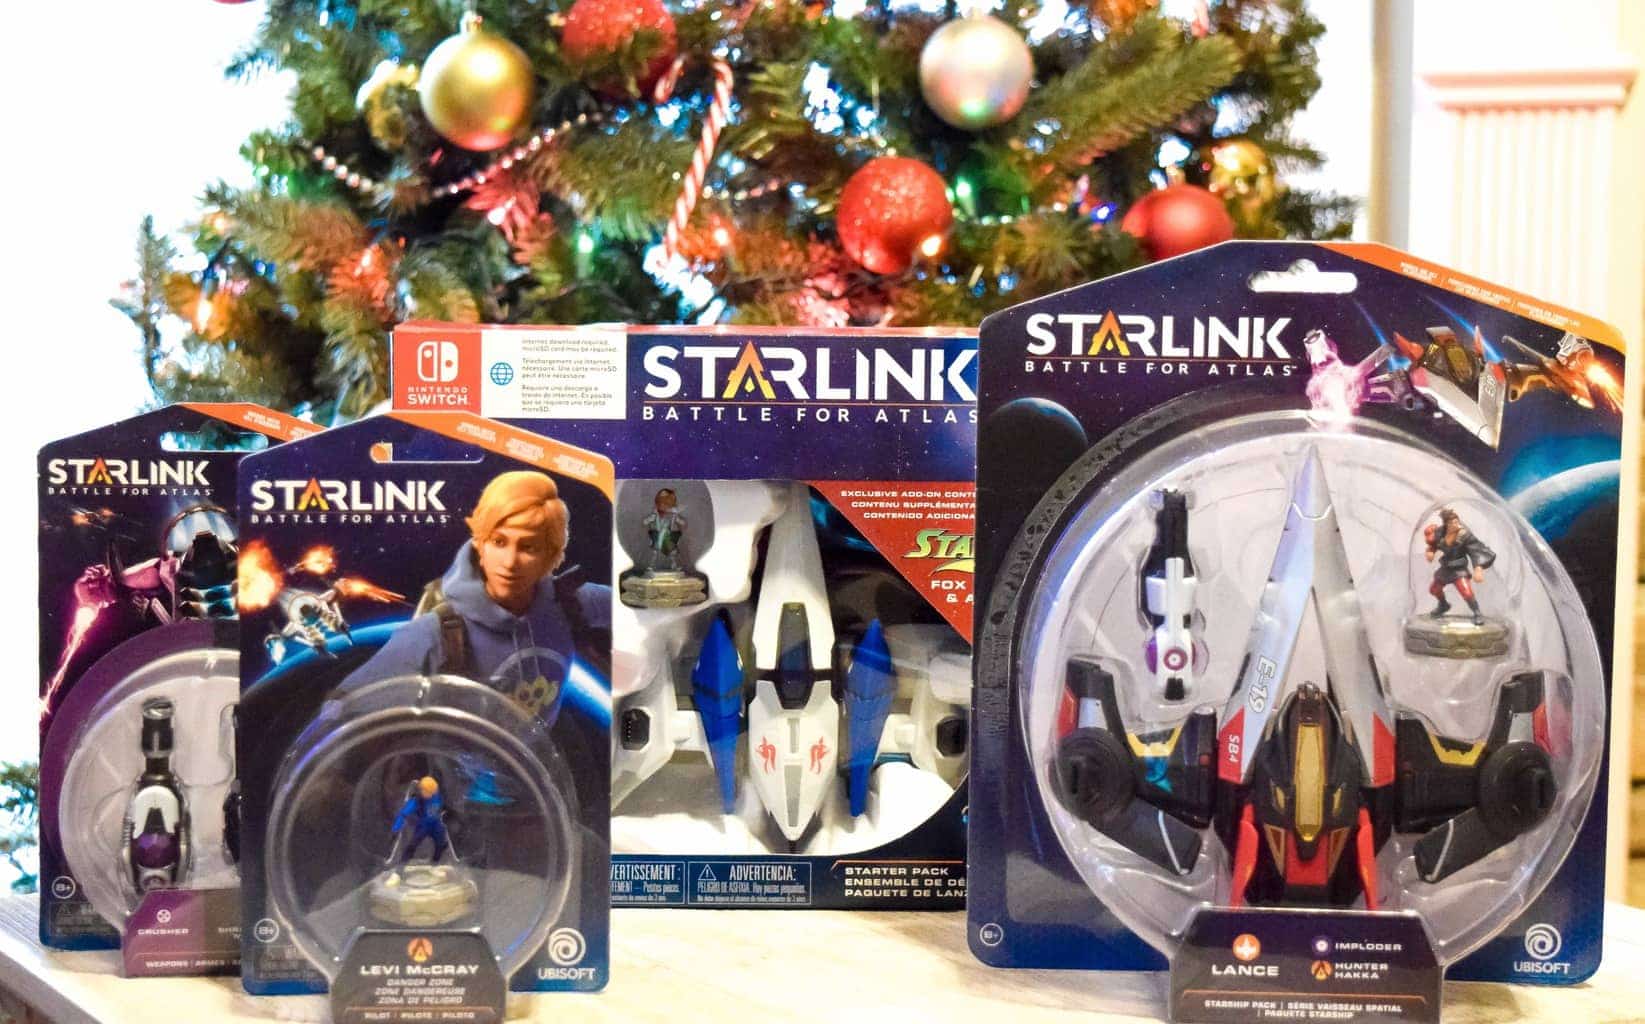 The Starlink Battle for Atlas for your Nintendo Switch will create so much fun for you and your family! Features modular toy technology. Available at @BestBuy @StarlinkGame #AD #StarlinkGame #BestBuy